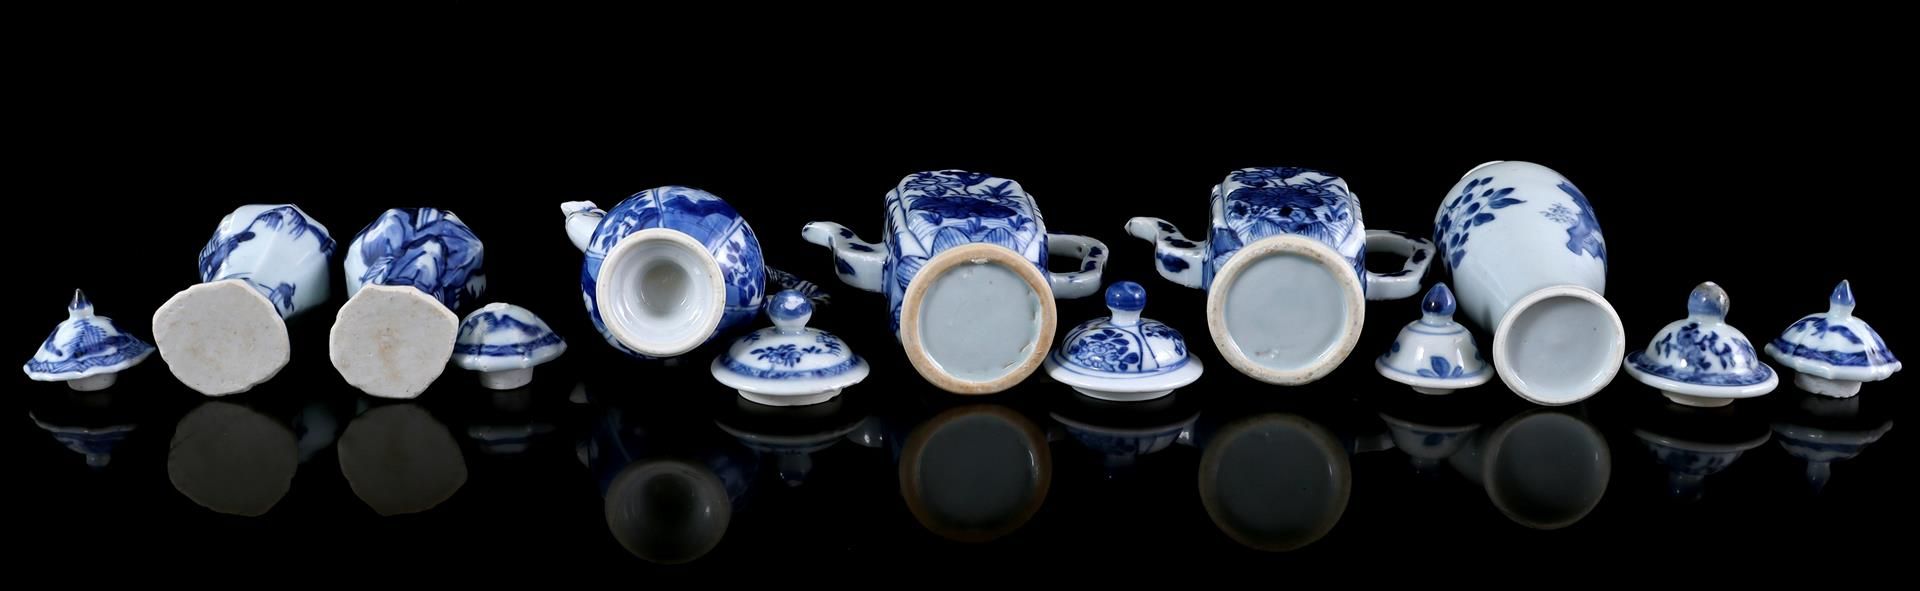 Porcelain miniature jugs, lidded pots and loose lids, China 18th/19th century - Image 6 of 6